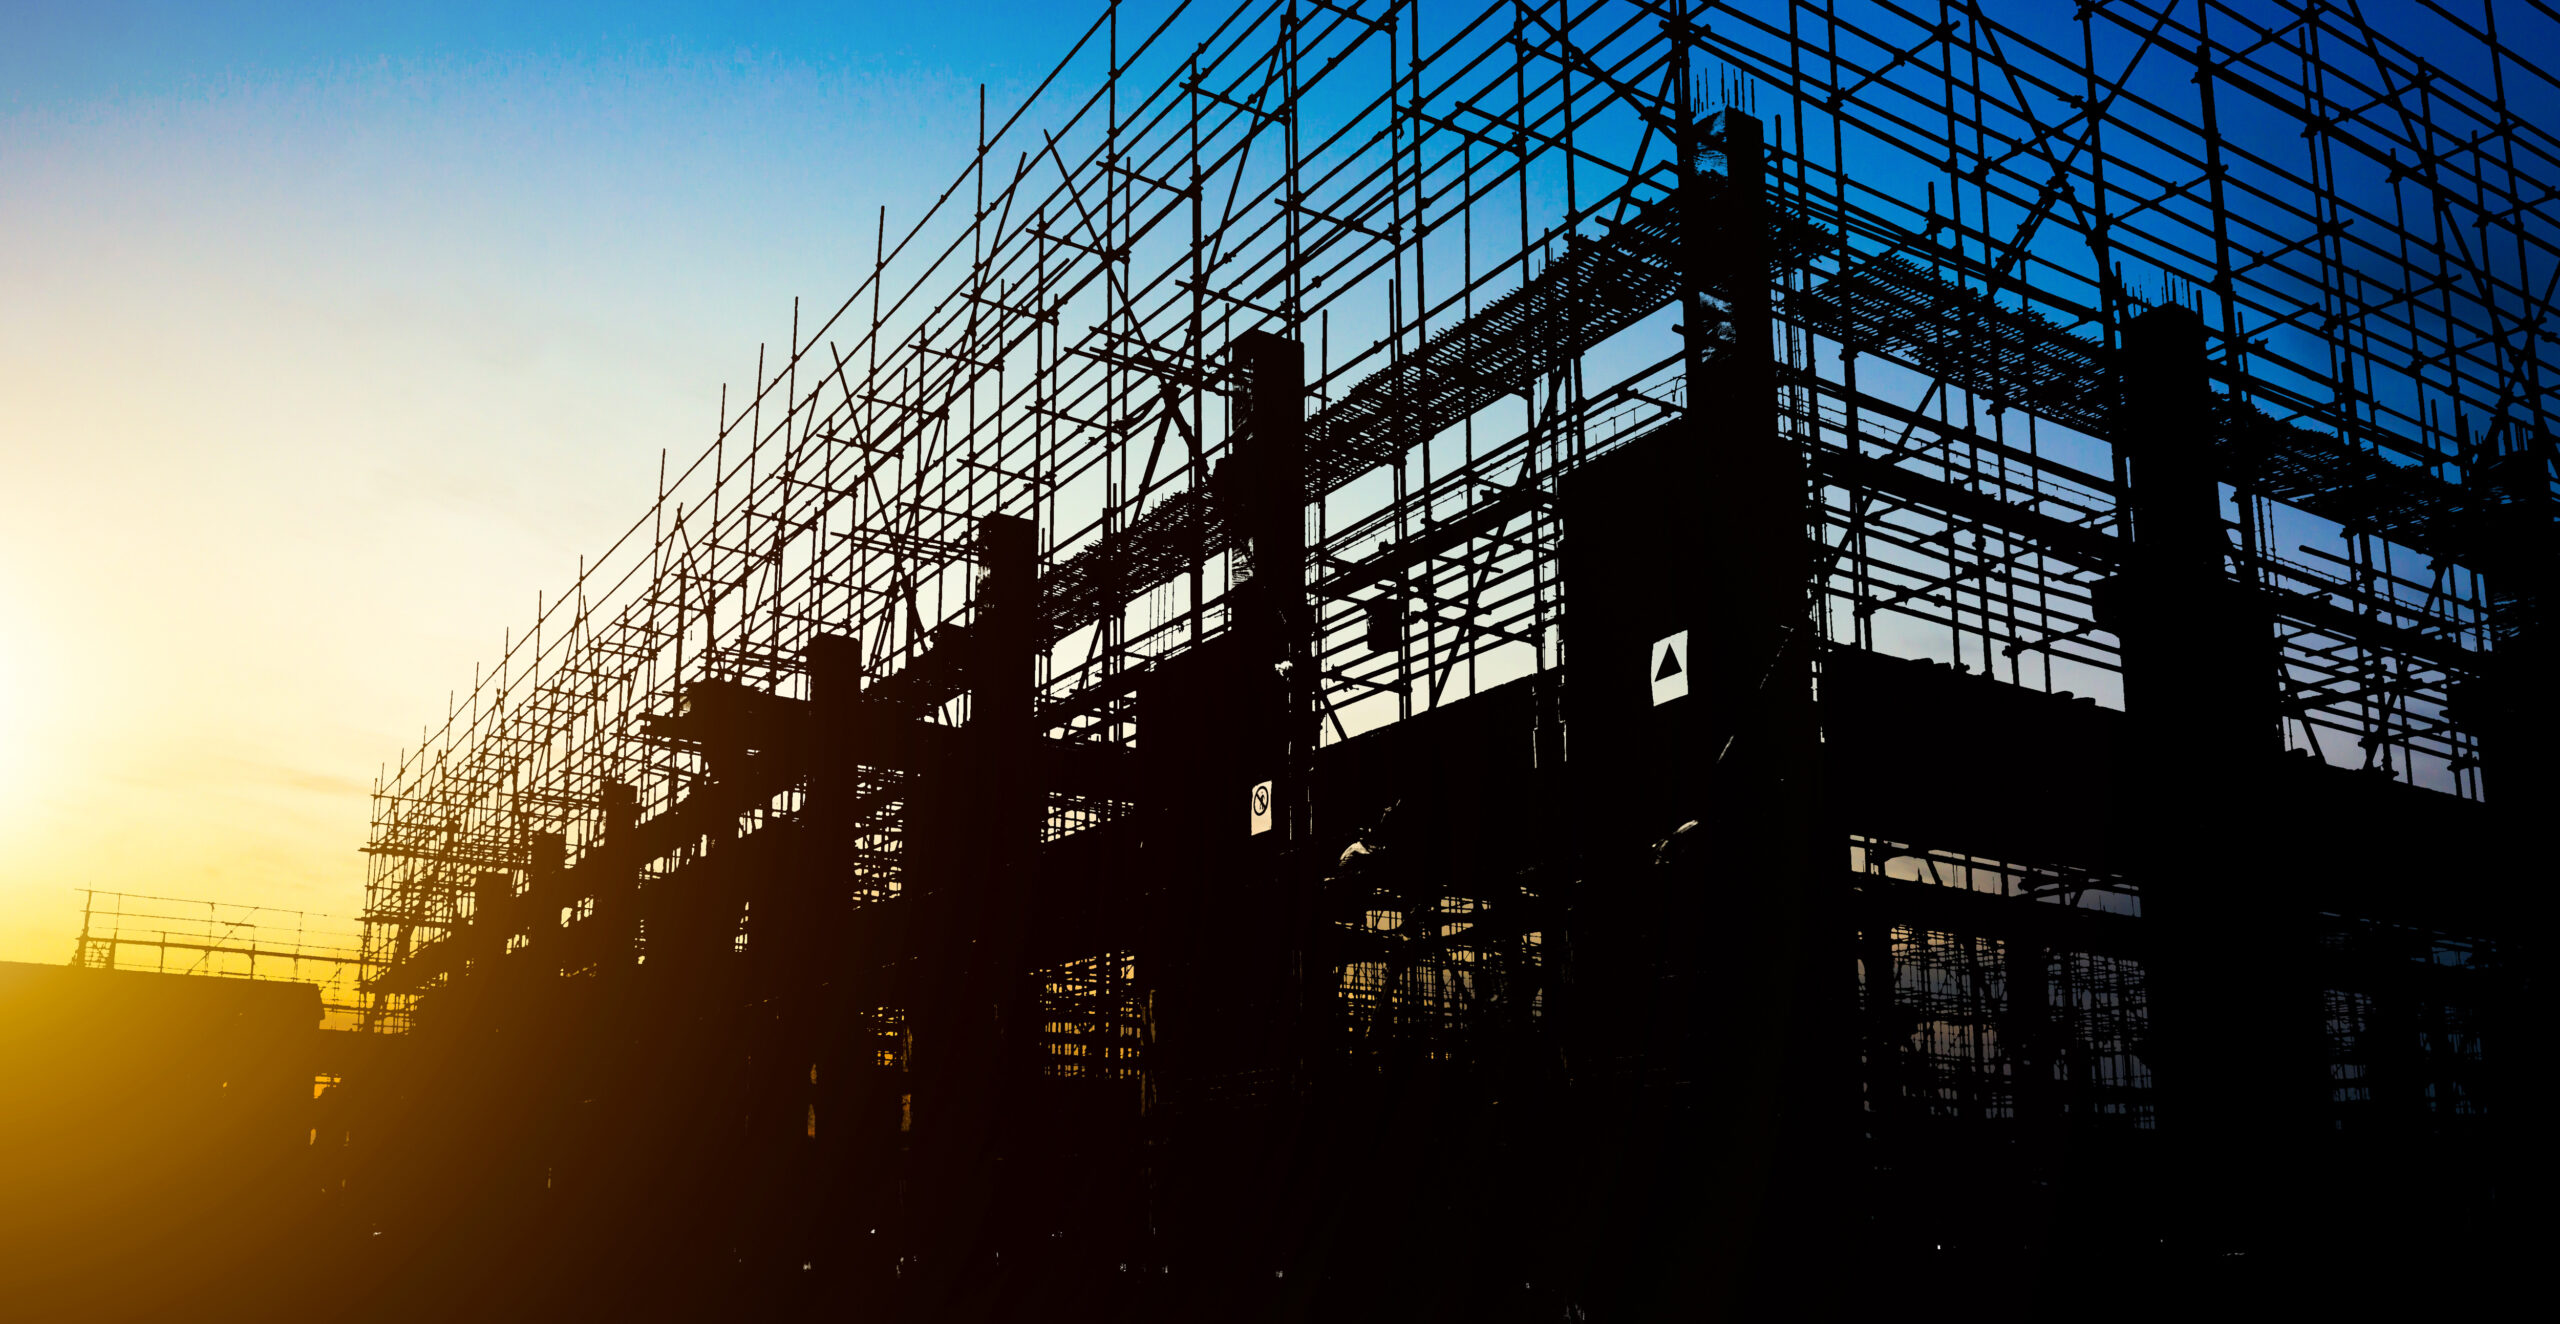 Elevate your project - <br>contact scaffolding pros today.